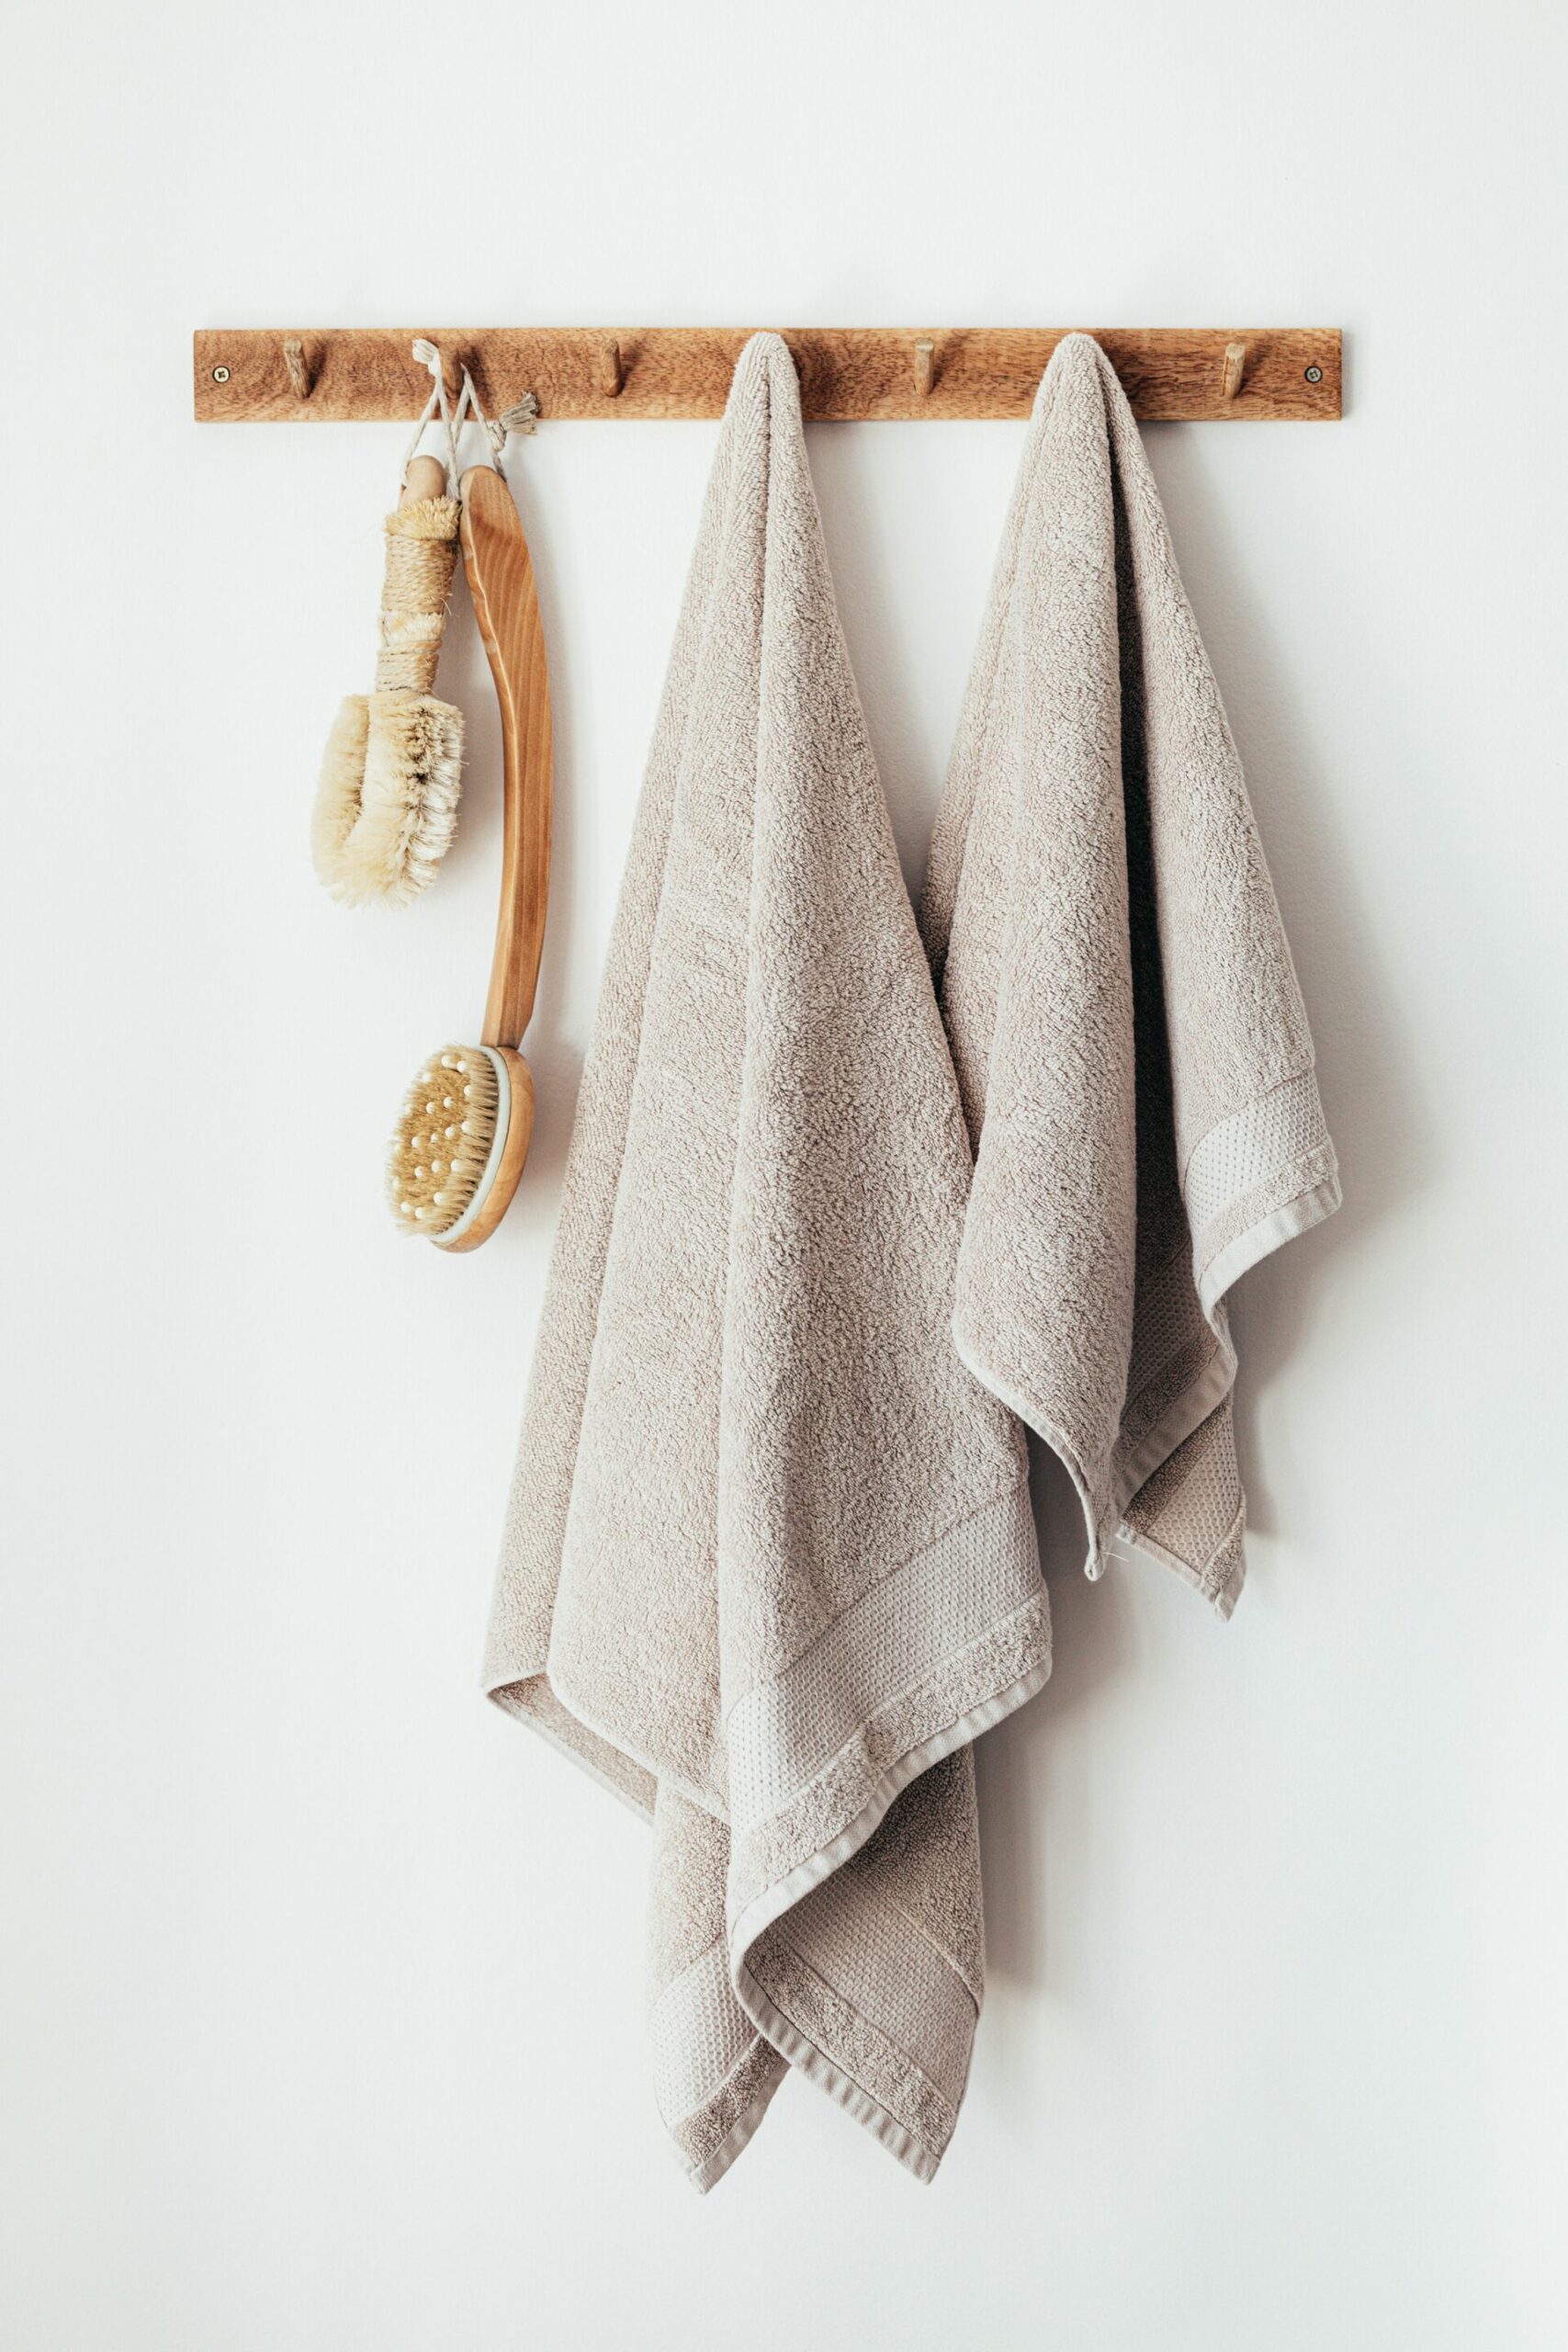 Wooden hanger with bath towels and body brushes hanging - Young Living Lavender Life blog